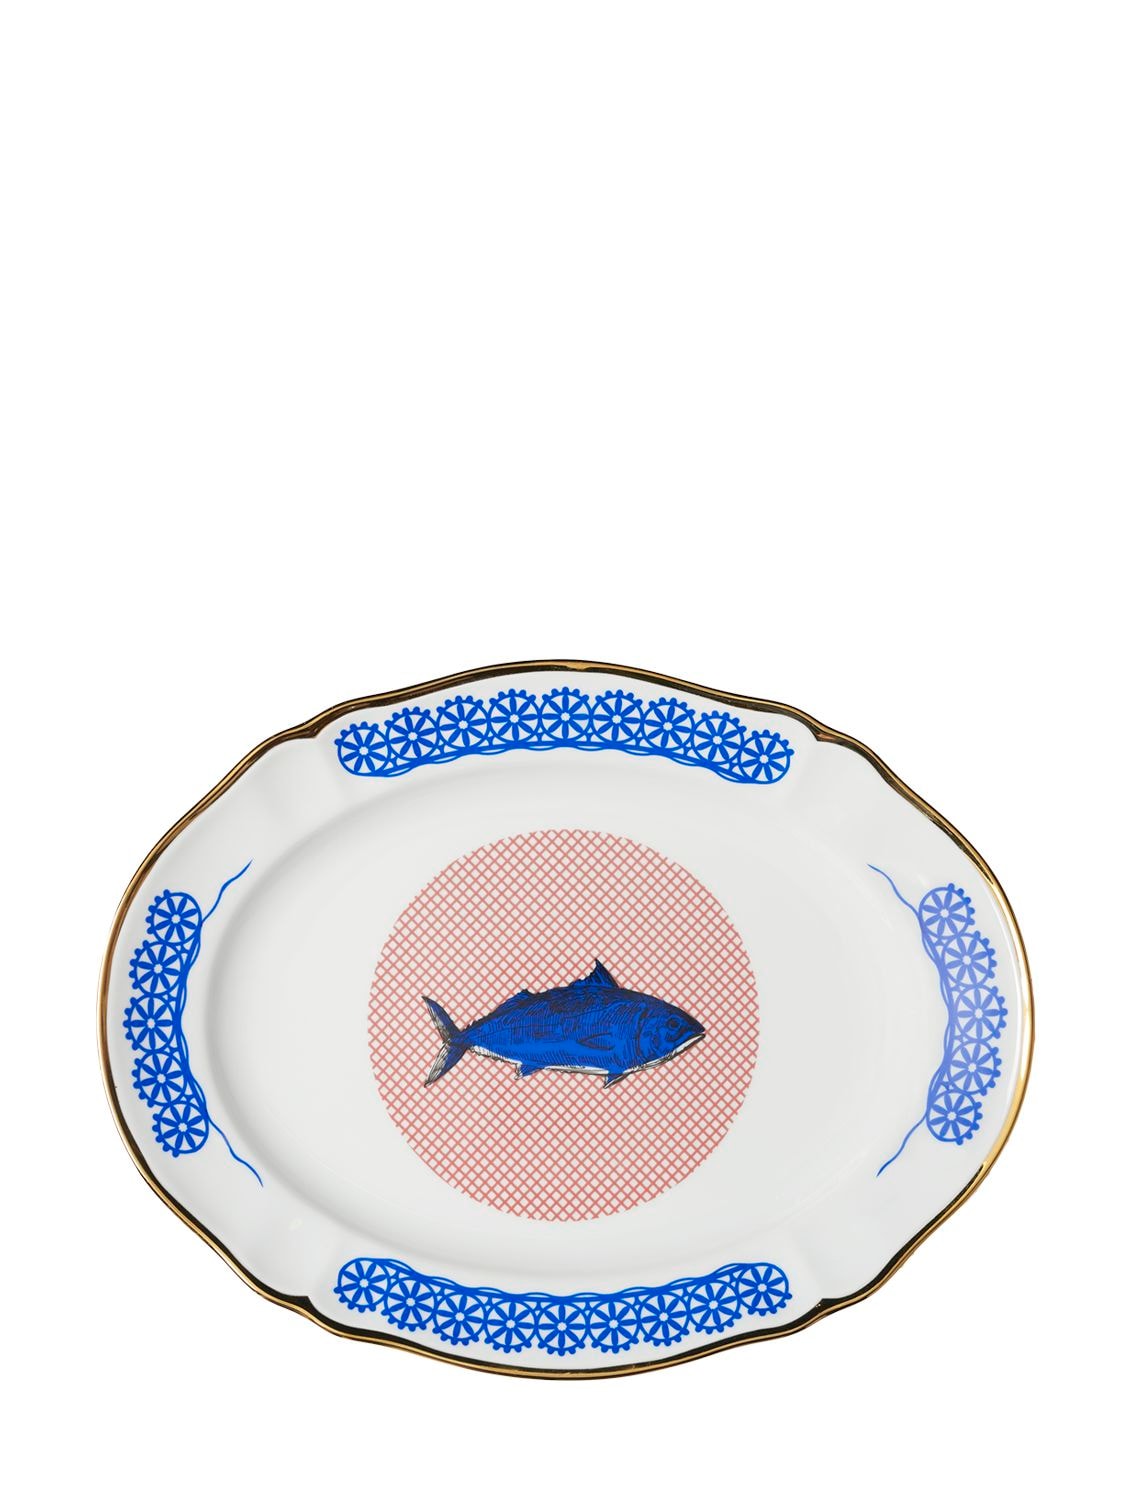 Bitossi Home Bel Paese Oval Platter In White,blue